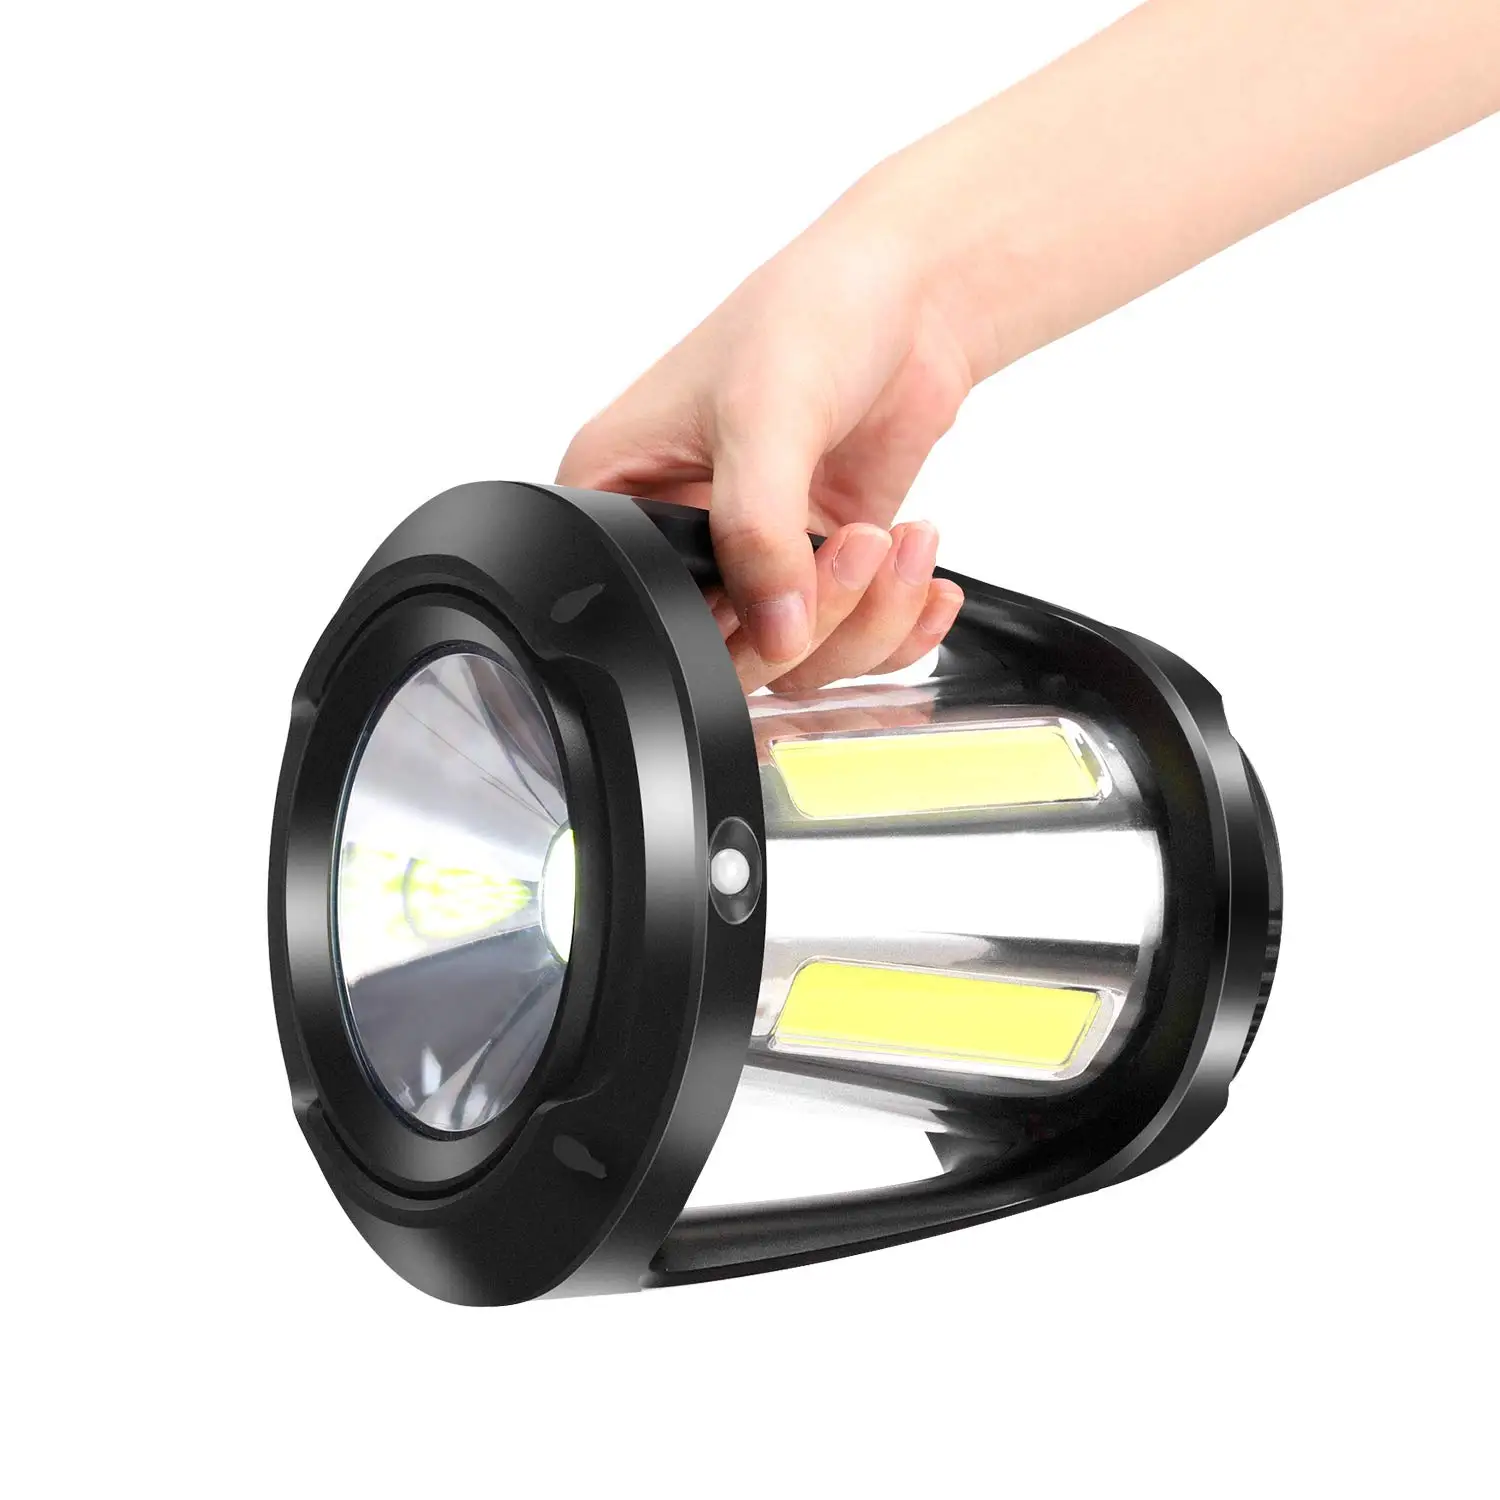 

Camping Light with Sensor Function, Battery Powered 1800 Lumens COB Camping Light for Hurricane, Camping, Emergency Kit